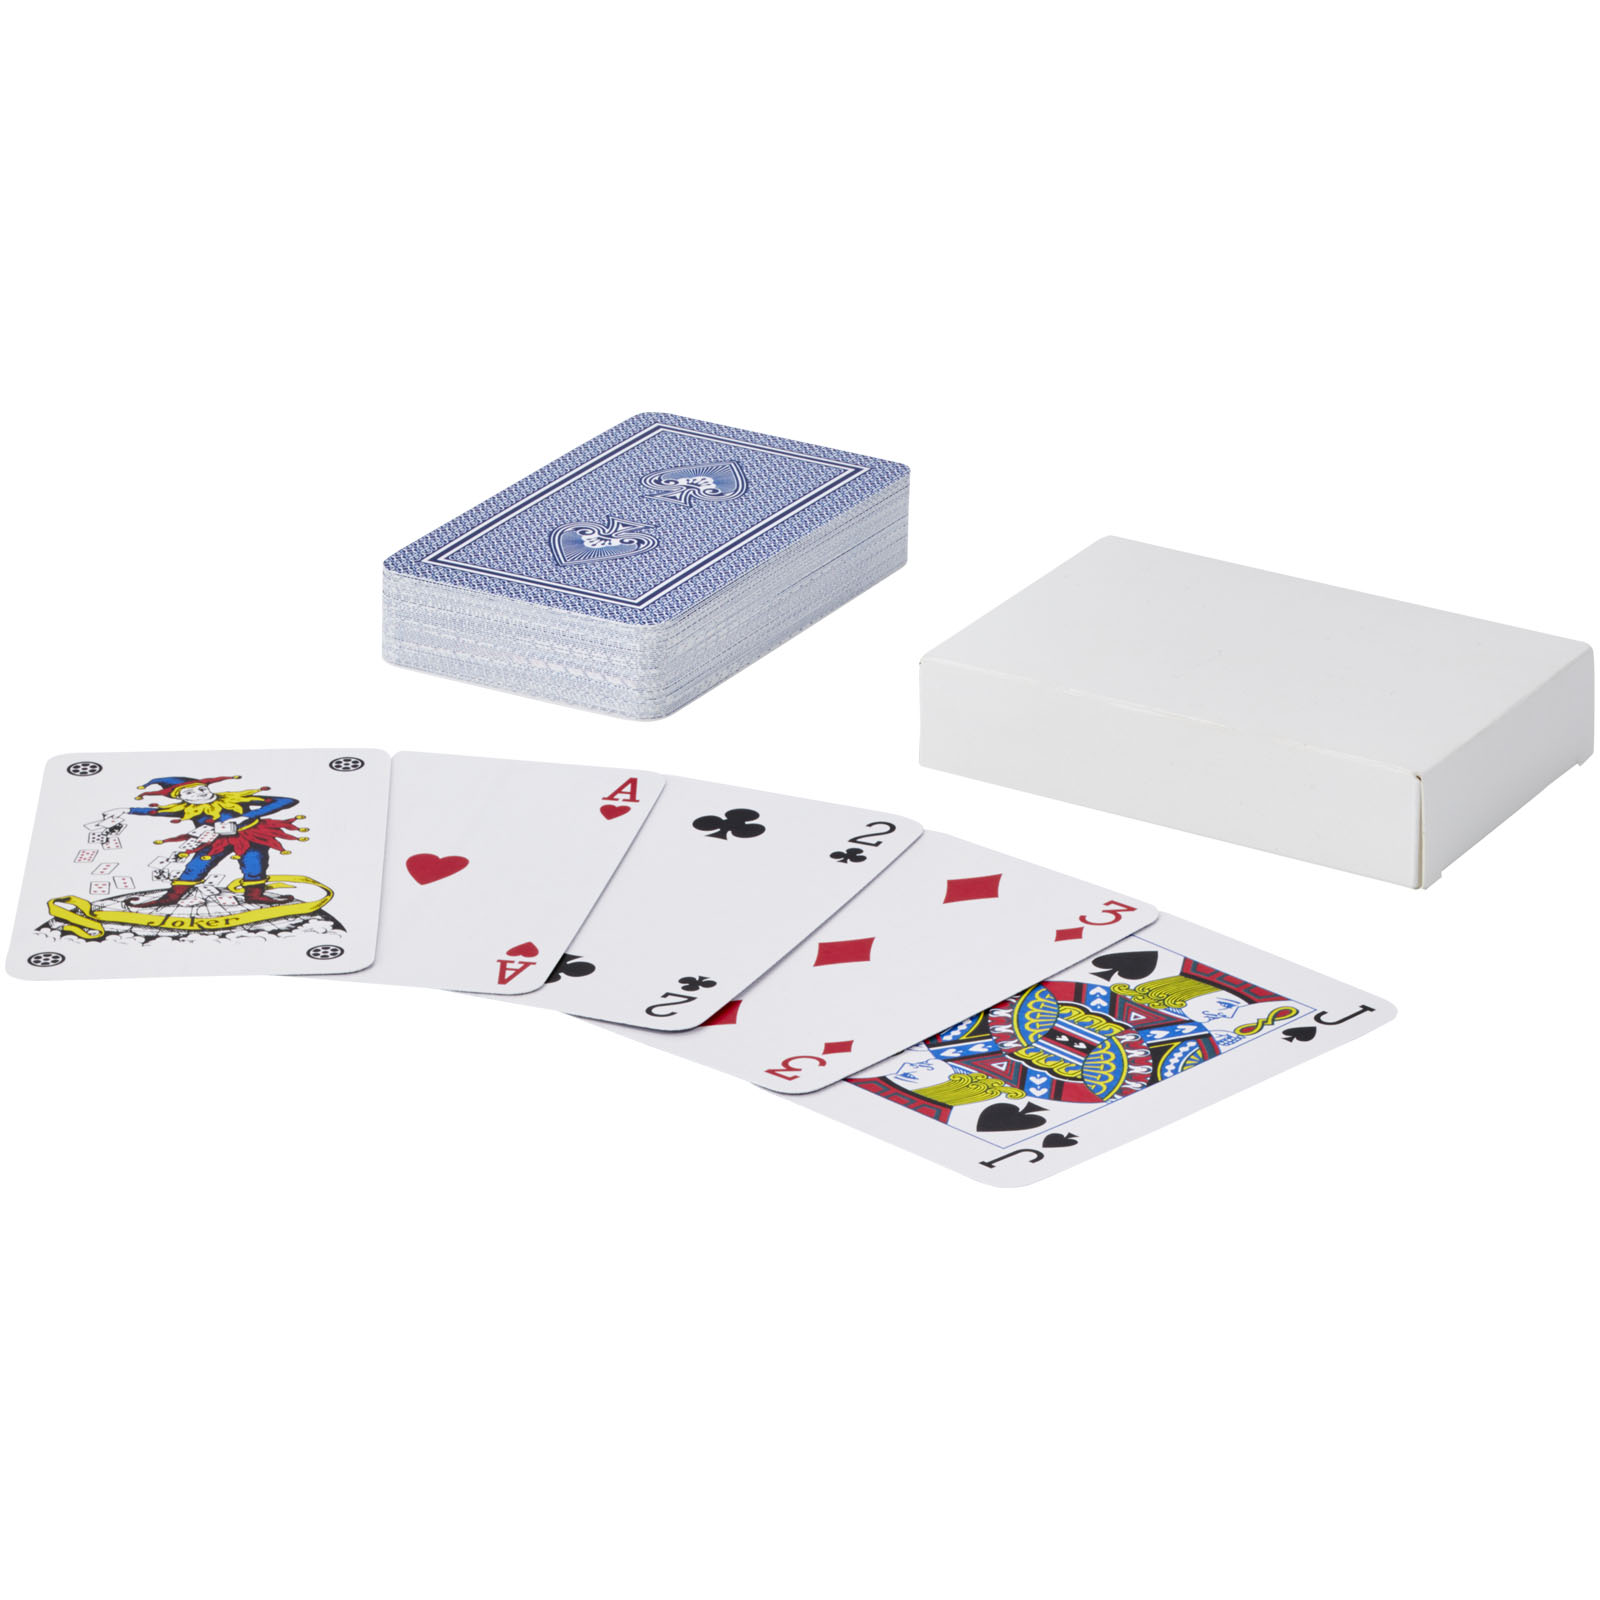 Advertising Indoor Games - Ace playing card set